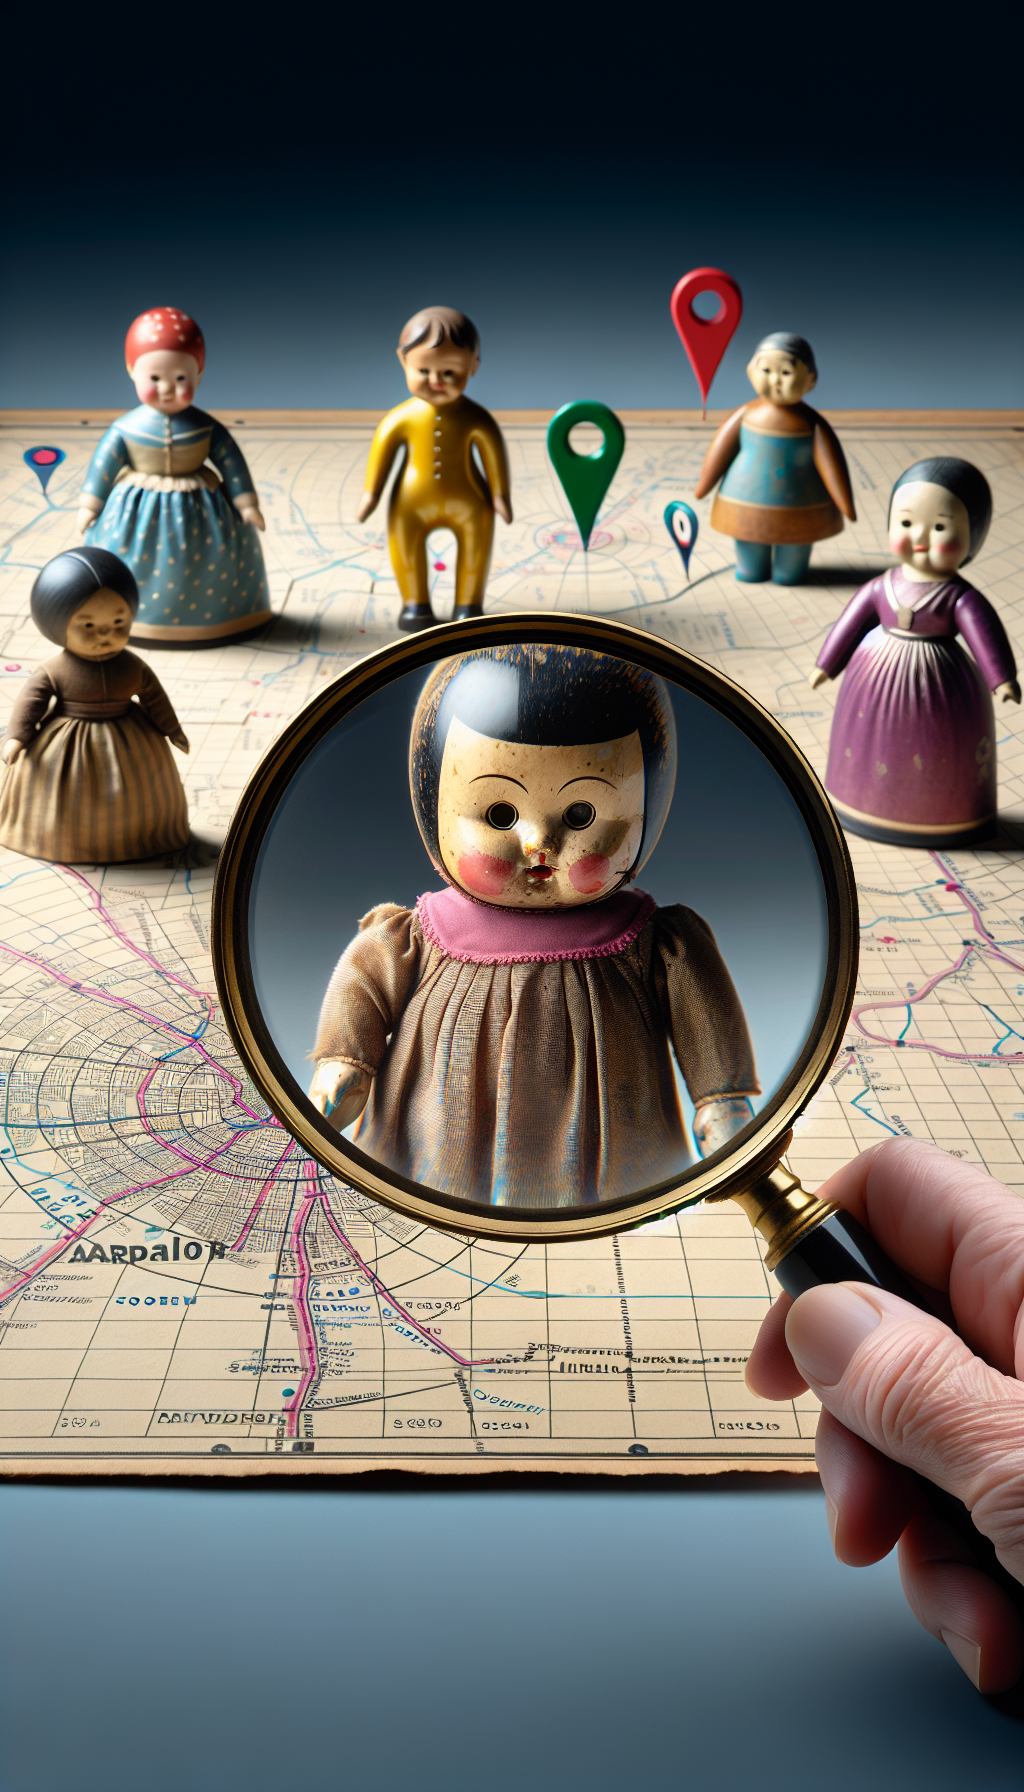 An illustration depicts a magnifying glass hovering over a cluster of vintage toys on a map marked with location pins. Through the lens, an antique doll comes into sharp focus, while an appraiser's eye peers from the opposite side, examining its worth. The map highlights nearby appraiser locations, blending the ideas of discovery and professional evaluation of nostalgic treasures.